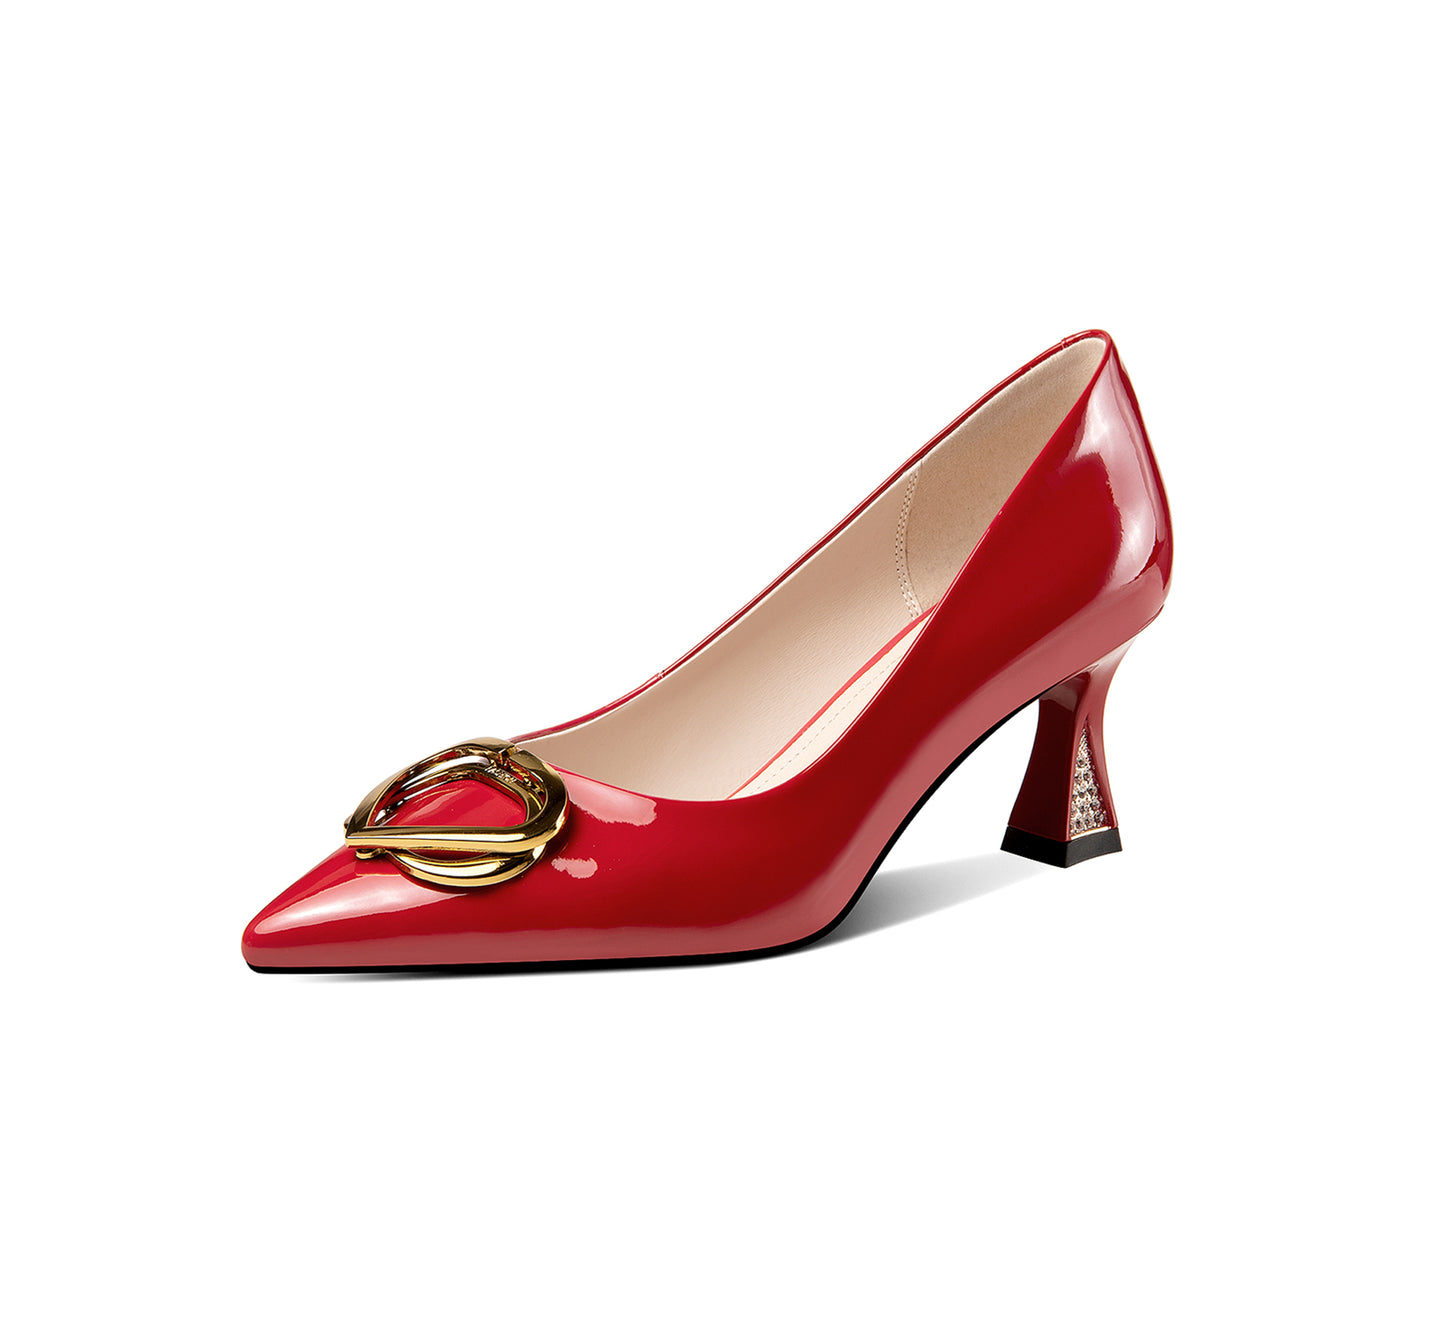 TinaCus Glossy Patent Leather Women's Handmade Spool Heel Pointed Toe Pumps with Metal Heart